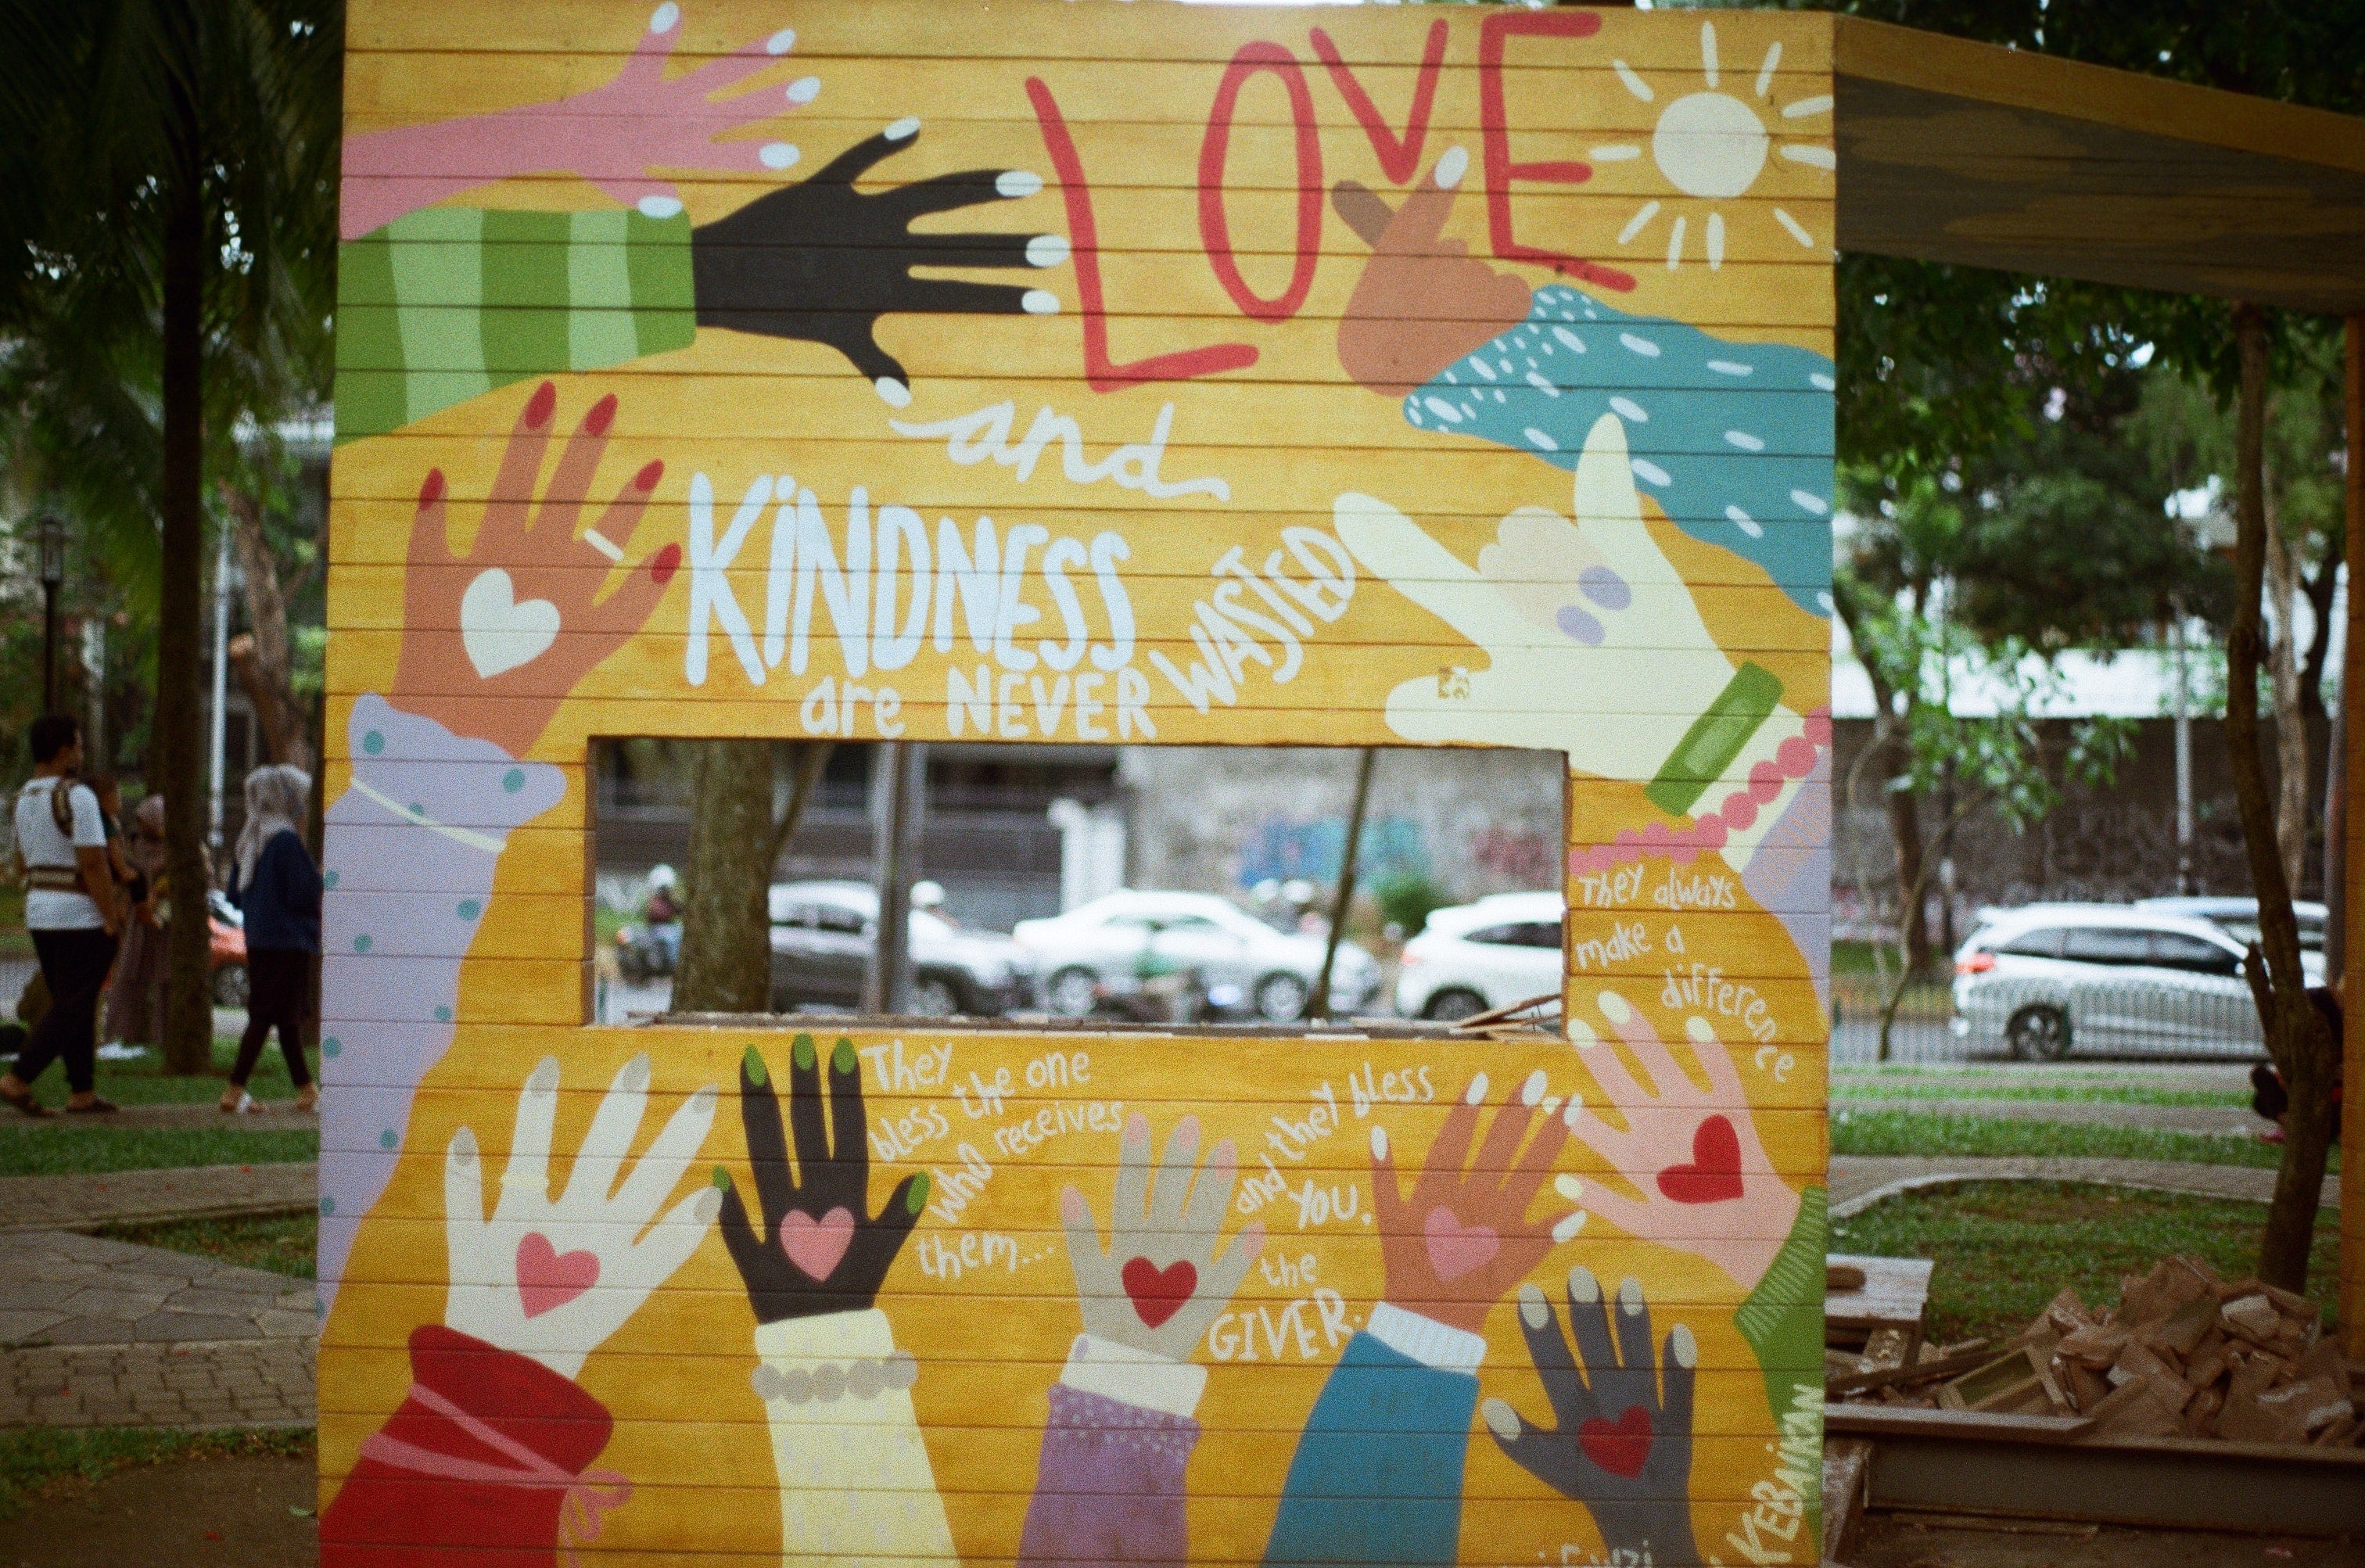 Here's the thing about kindness